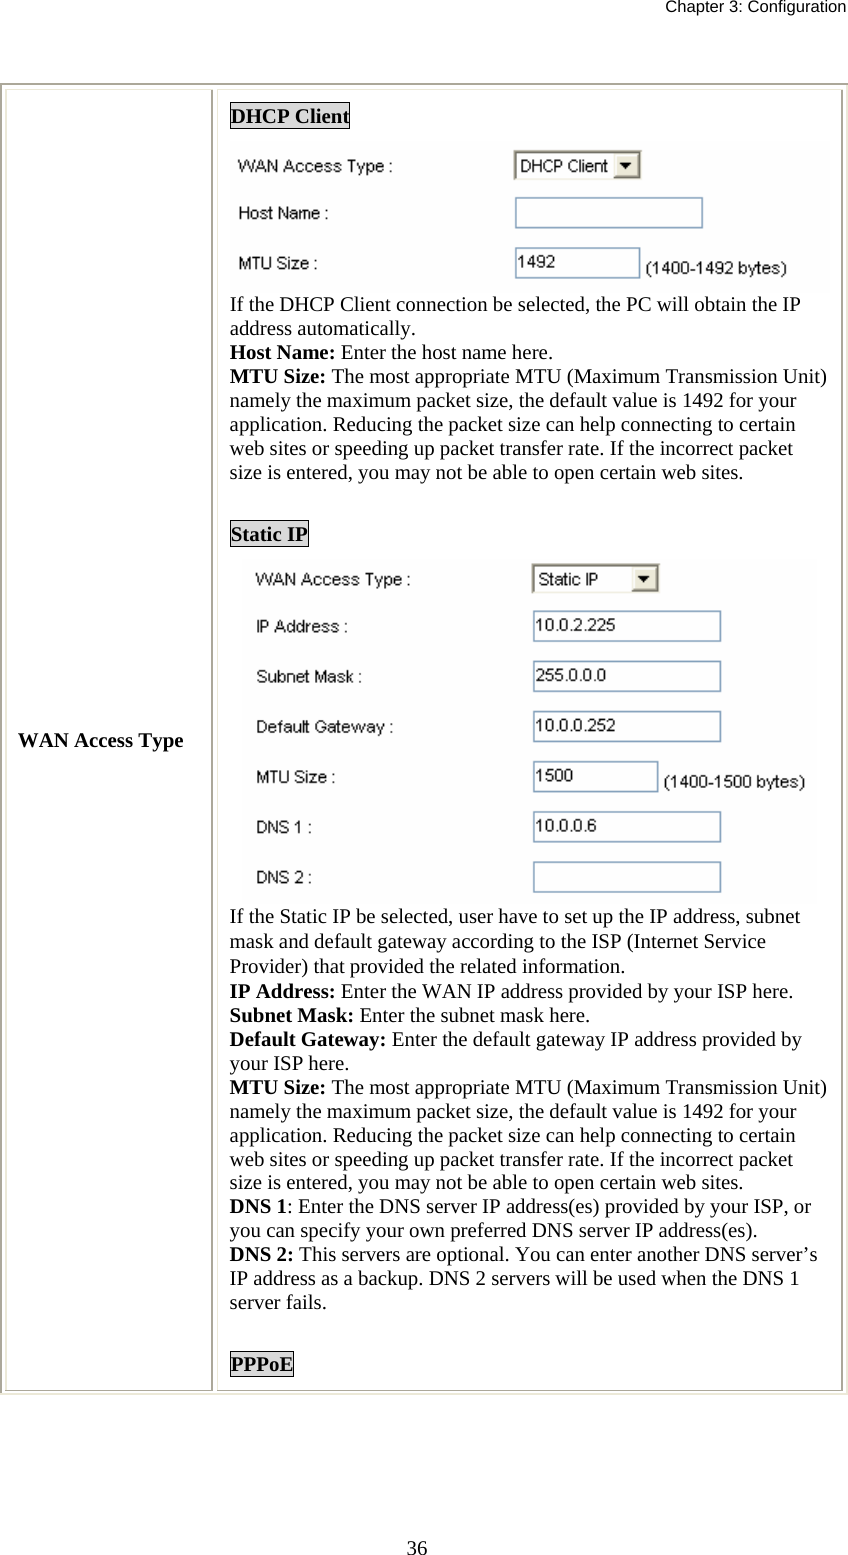   Chapter 3: Configuration  36 WAN Access Type DHCP Client If the DHCP Client connection be selected, the PC will obtain the IP address automatically. Host Name: Enter the host name here. MTU Size: The most appropriate MTU (Maximum Transmission Unit) namely the maximum packet size, the default value is 1492 for your application. Reducing the packet size can help connecting to certain web sites or speeding up packet transfer rate. If the incorrect packet size is entered, you may not be able to open certain web sites.  Static IP  If the Static IP be selected, user have to set up the IP address, subnet mask and default gateway according to the ISP (Internet Service Provider) that provided the related information. IP Address: Enter the WAN IP address provided by your ISP here. Subnet Mask: Enter the subnet mask here. Default Gateway: Enter the default gateway IP address provided by your ISP here. MTU Size: The most appropriate MTU (Maximum Transmission Unit) namely the maximum packet size, the default value is 1492 for your application. Reducing the packet size can help connecting to certain web sites or speeding up packet transfer rate. If the incorrect packet size is entered, you may not be able to open certain web sites. DNS 1: Enter the DNS server IP address(es) provided by your ISP, or you can specify your own preferred DNS server IP address(es).  DNS 2: This servers are optional. You can enter another DNS server’s IP address as a backup. DNS 2 servers will be used when the DNS 1 server fails.  PPPoE 